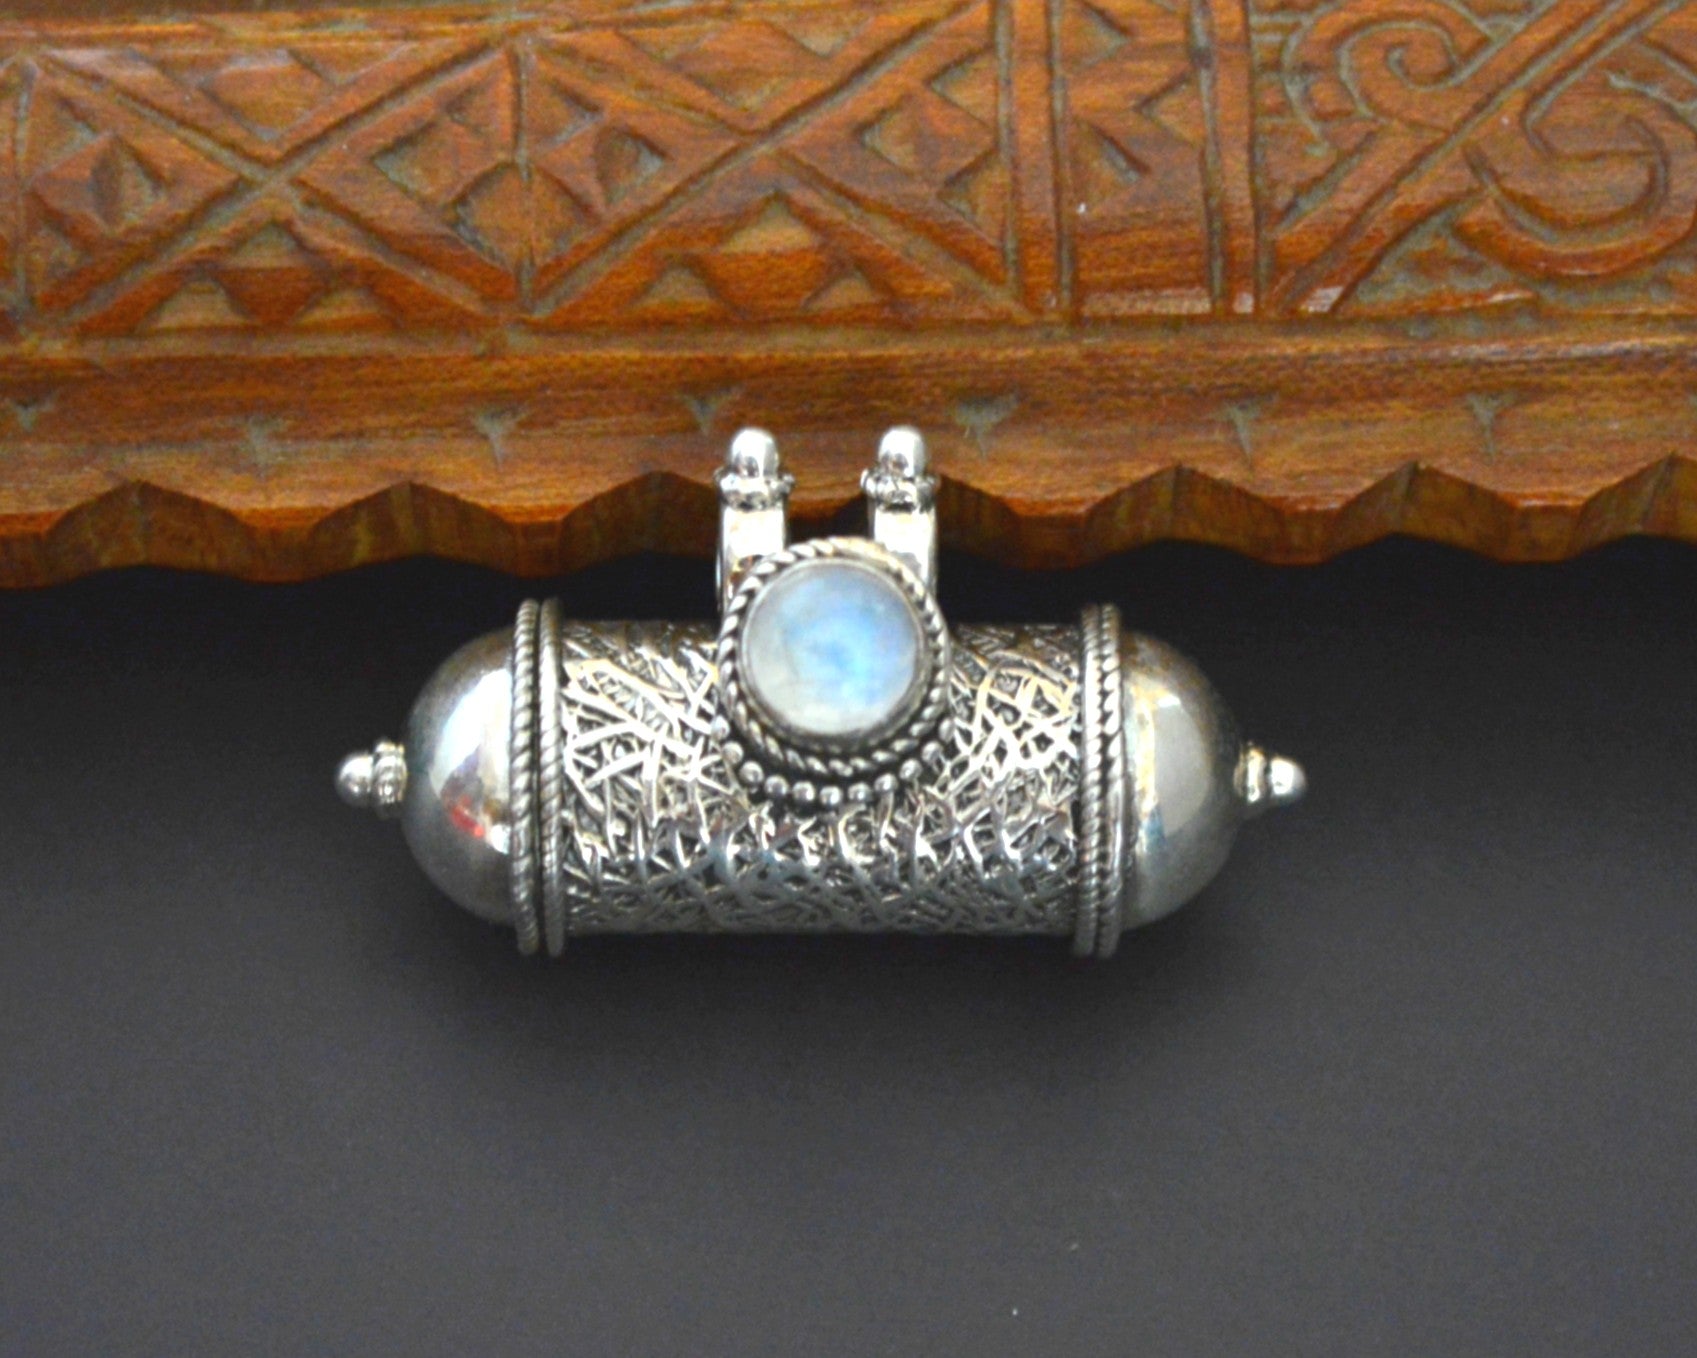 Openable Box Moonstone Pendant from India